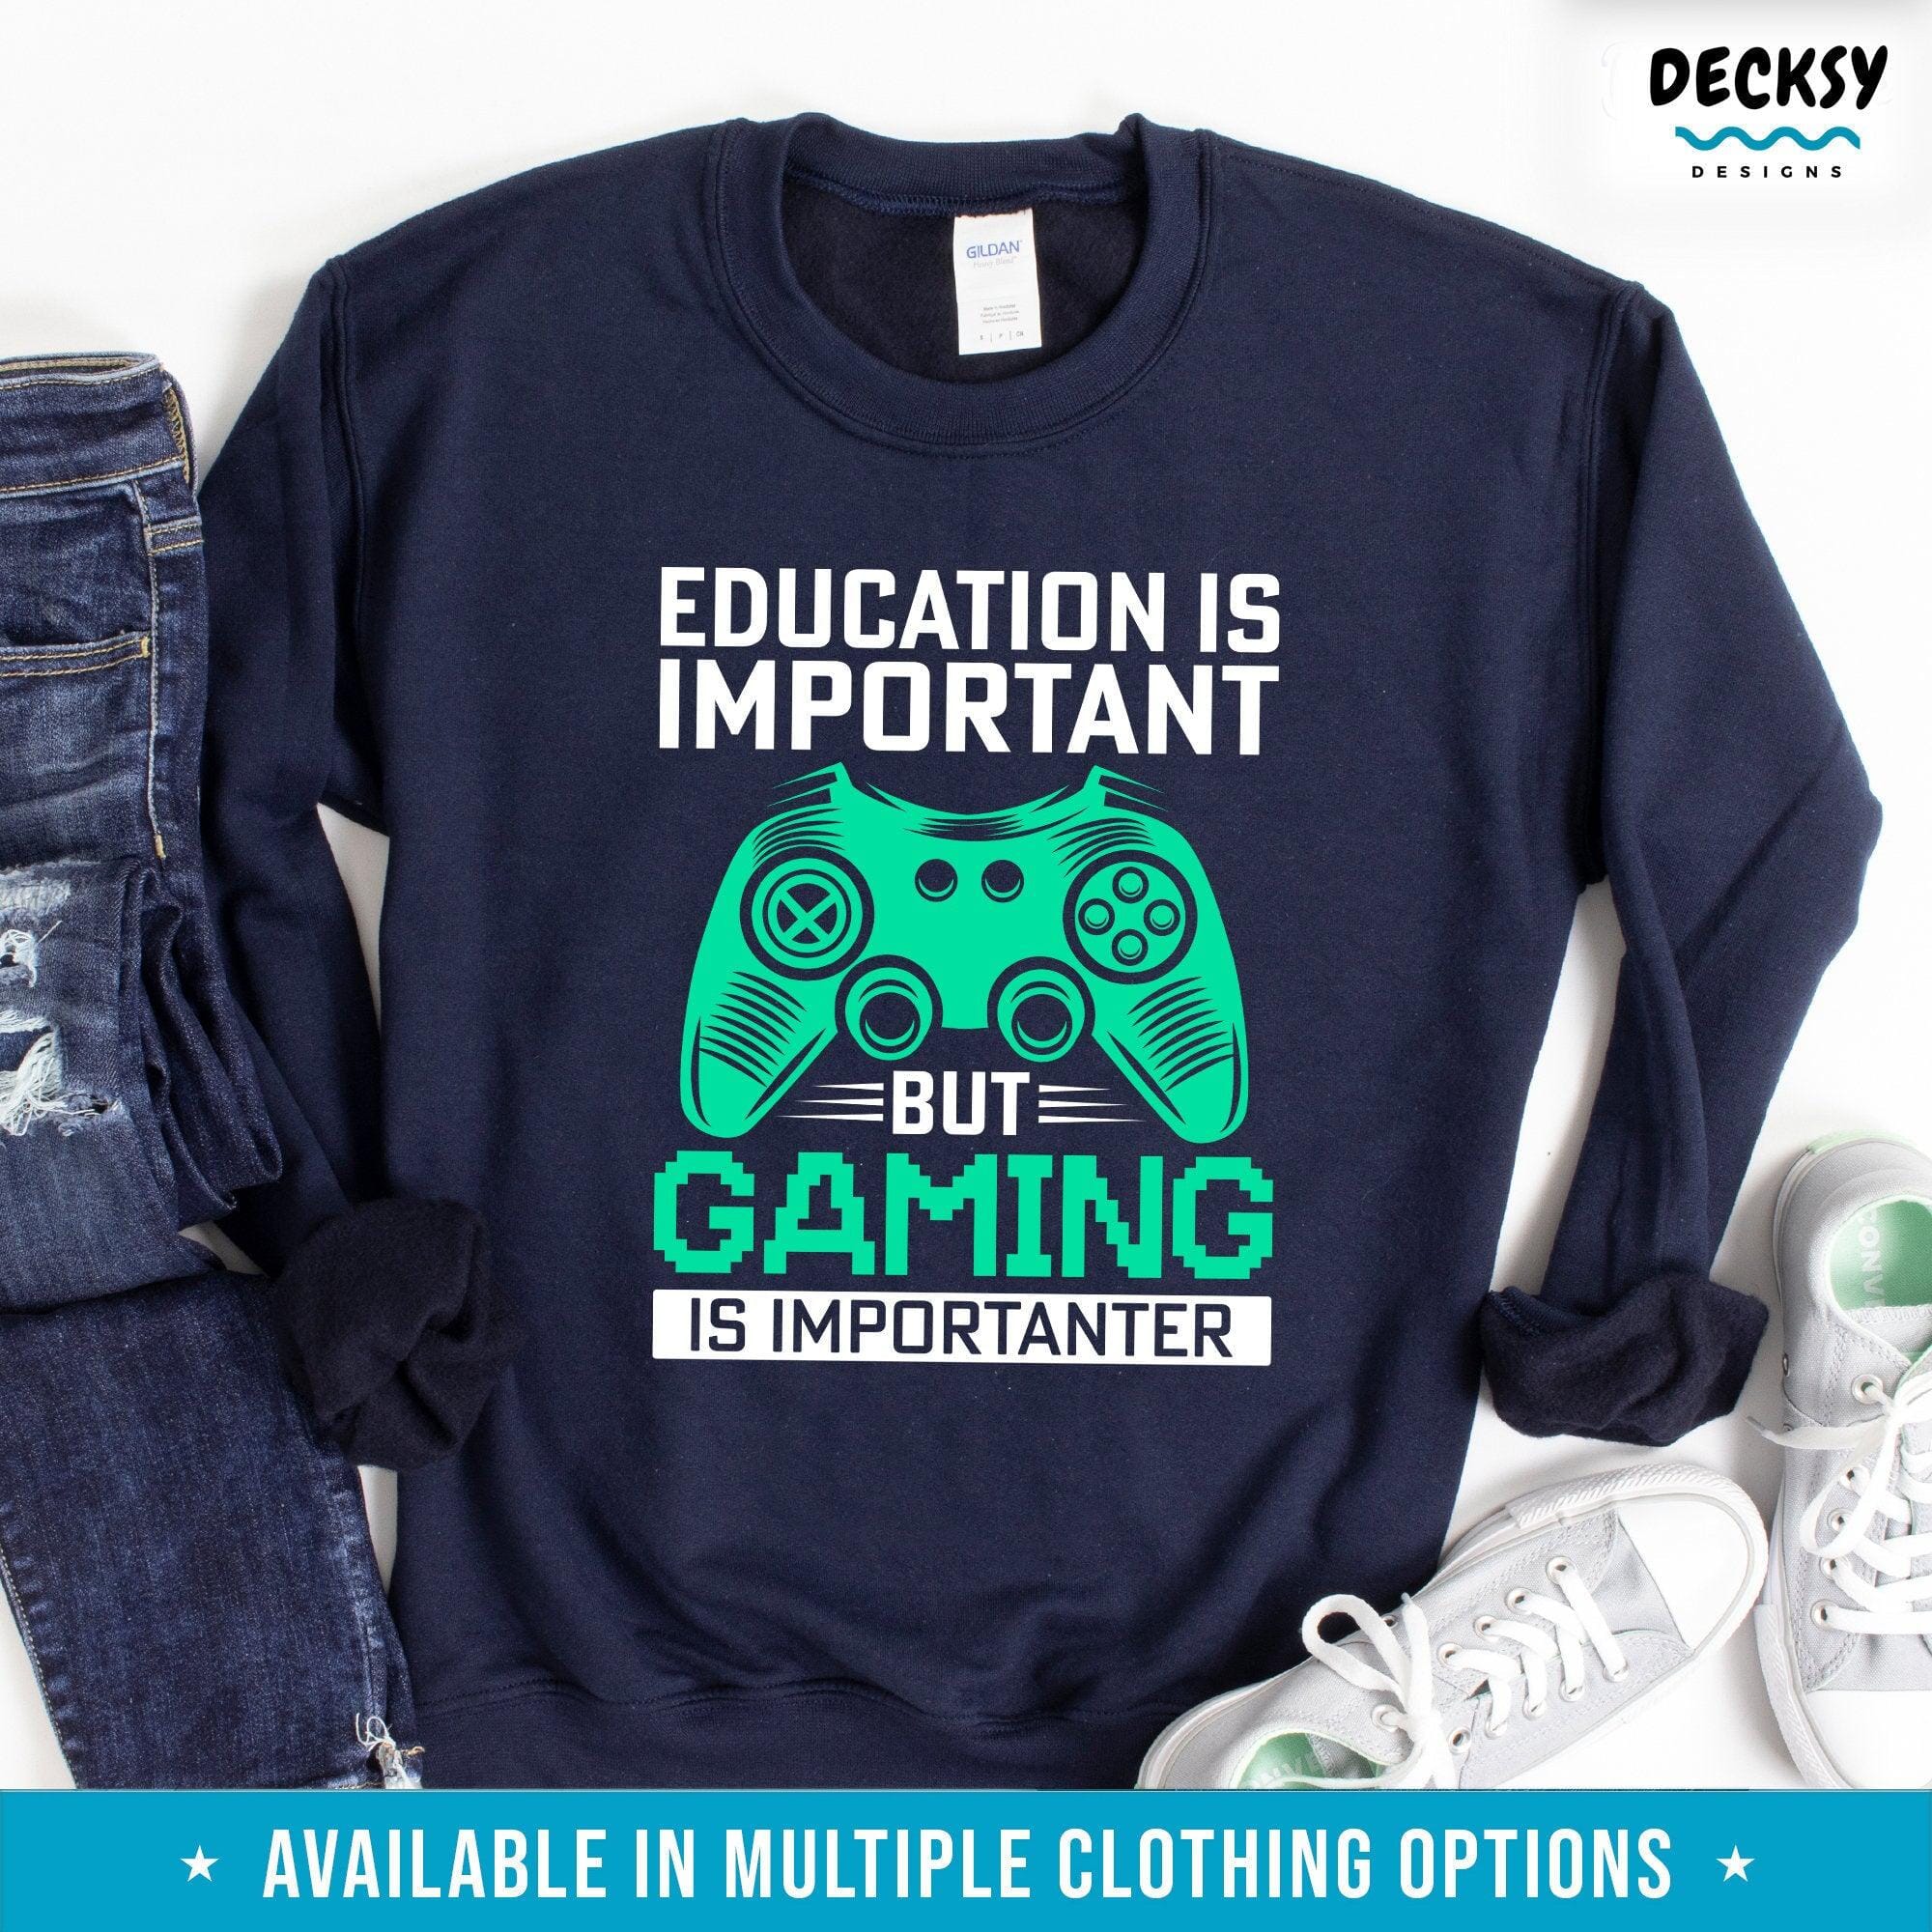 Gaming Shirt, Gamer Gift-Clothing:Gender-Neutral Adult Clothing:Tops & Tees:T-shirts:Graphic Tees-DecksyDesigns